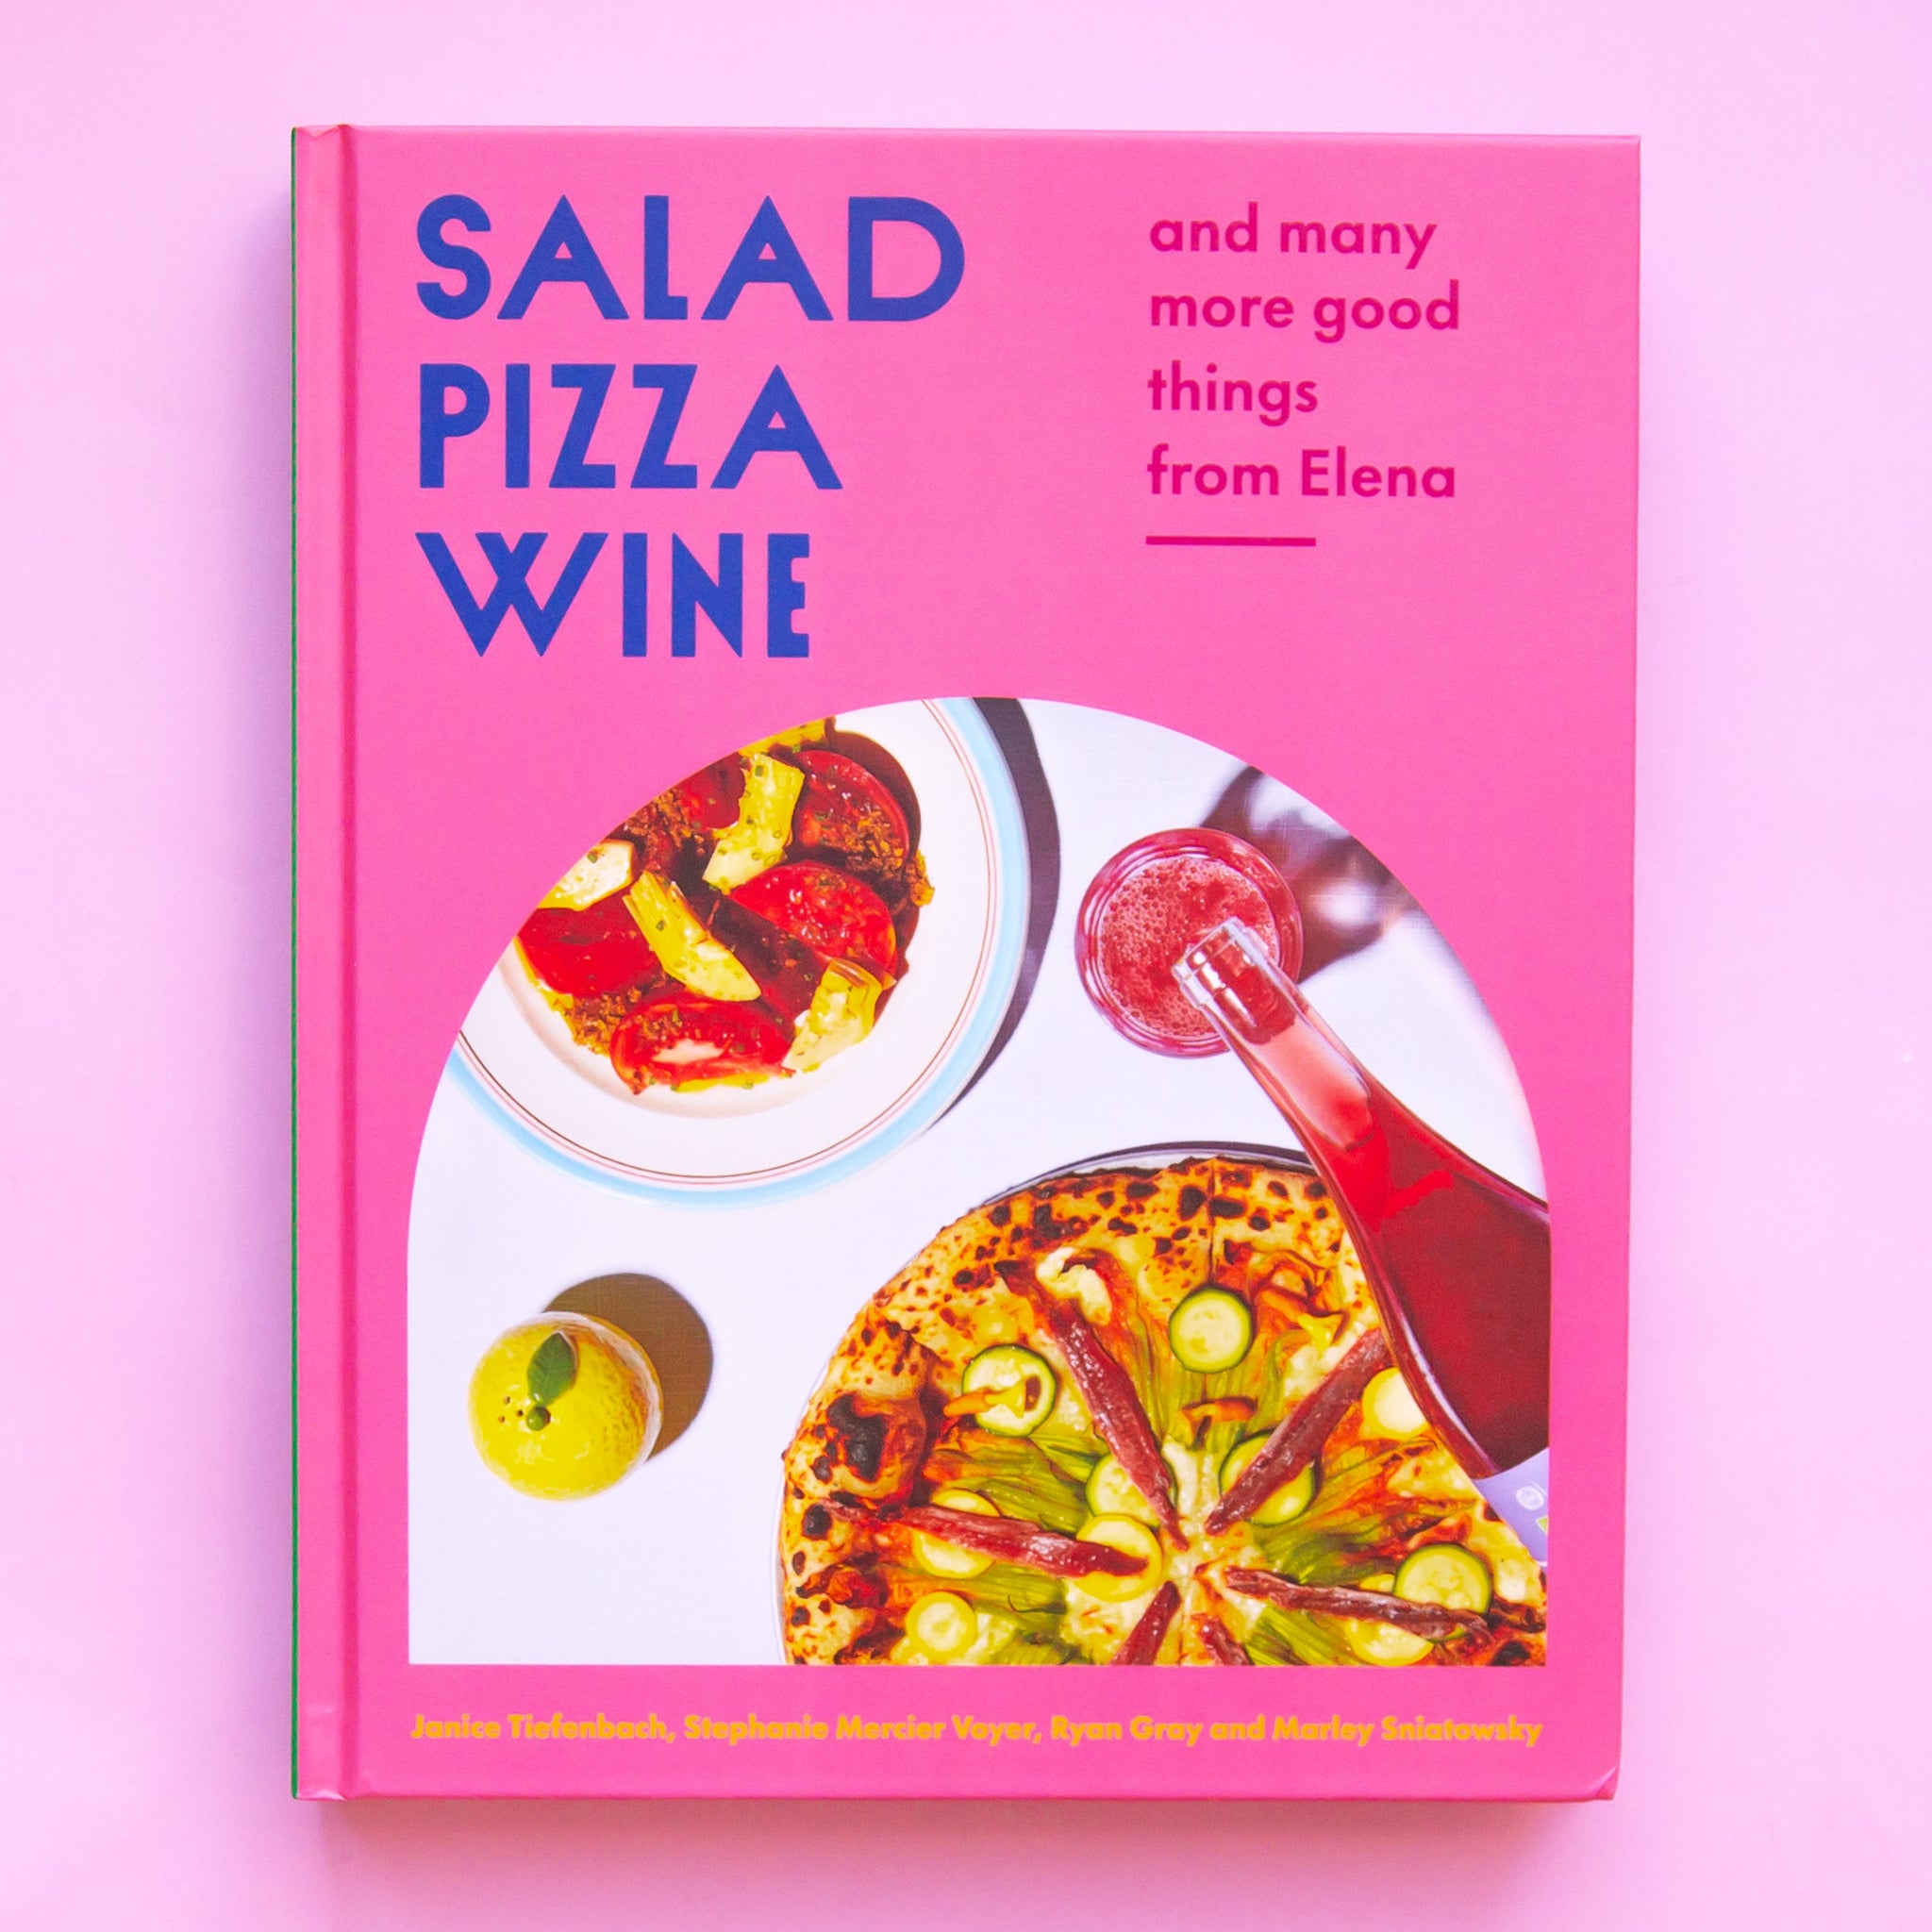 On a pink background is a pink hardback book with blue text on the top left corner that reads, "Salad Pizza Wine", "and many more good things from Elena" along with an arched photo of food on a table scape. 